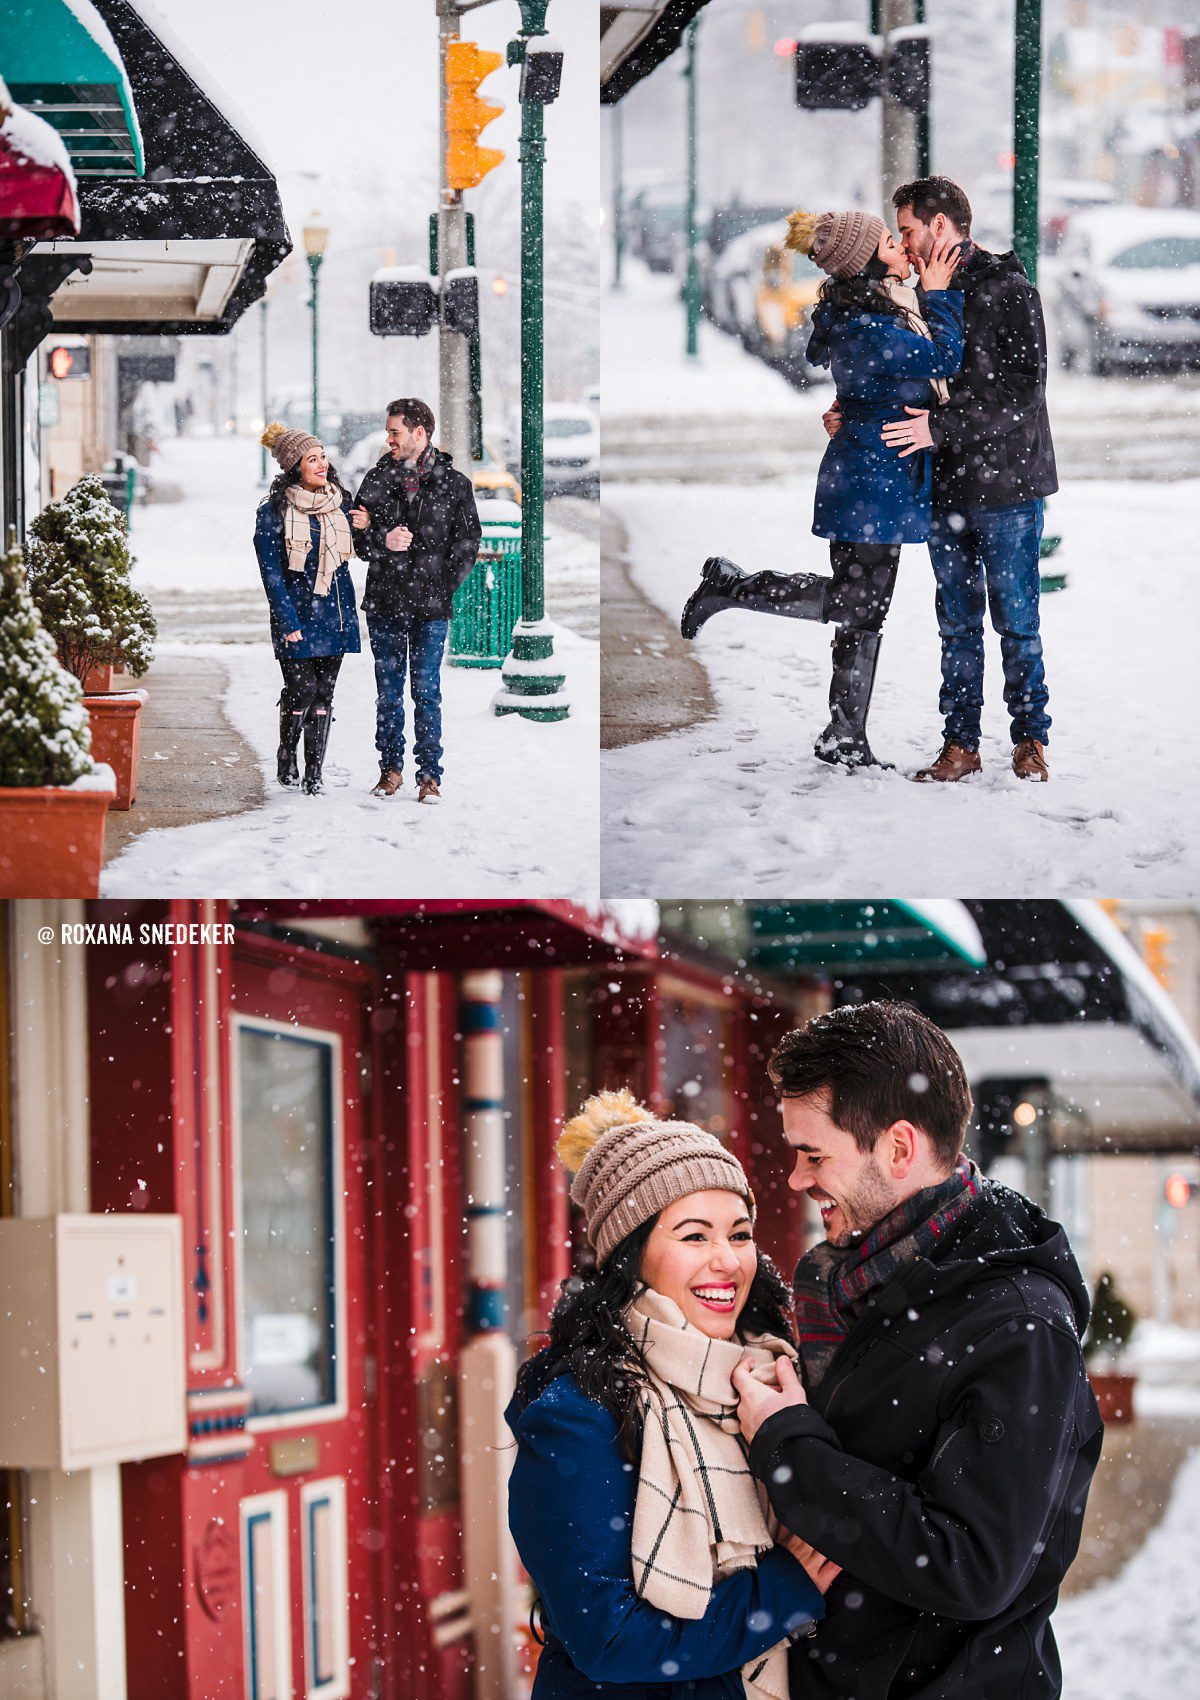 Behind the scenes engagement session in the snow Photoshoot